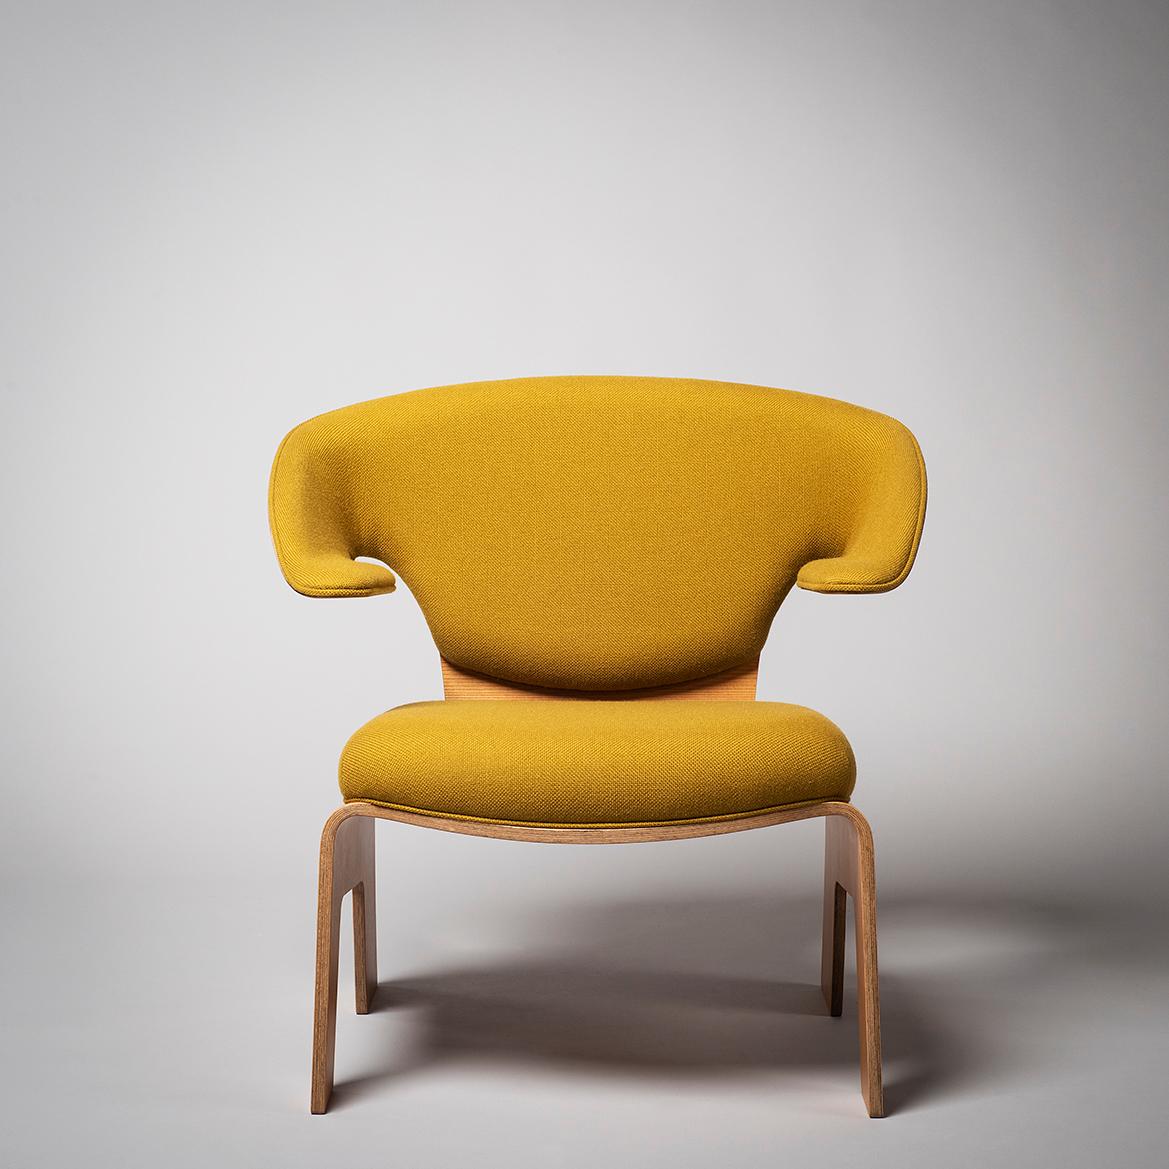 The Lounge Chair was designed by the architect Kenzo Tange for Tendo Mokko, a highly influential furniture company established by woodworkers in northern Japan in 1940. Amidst postwar rebuilding efforts and expanding consumerism in the 1950s and